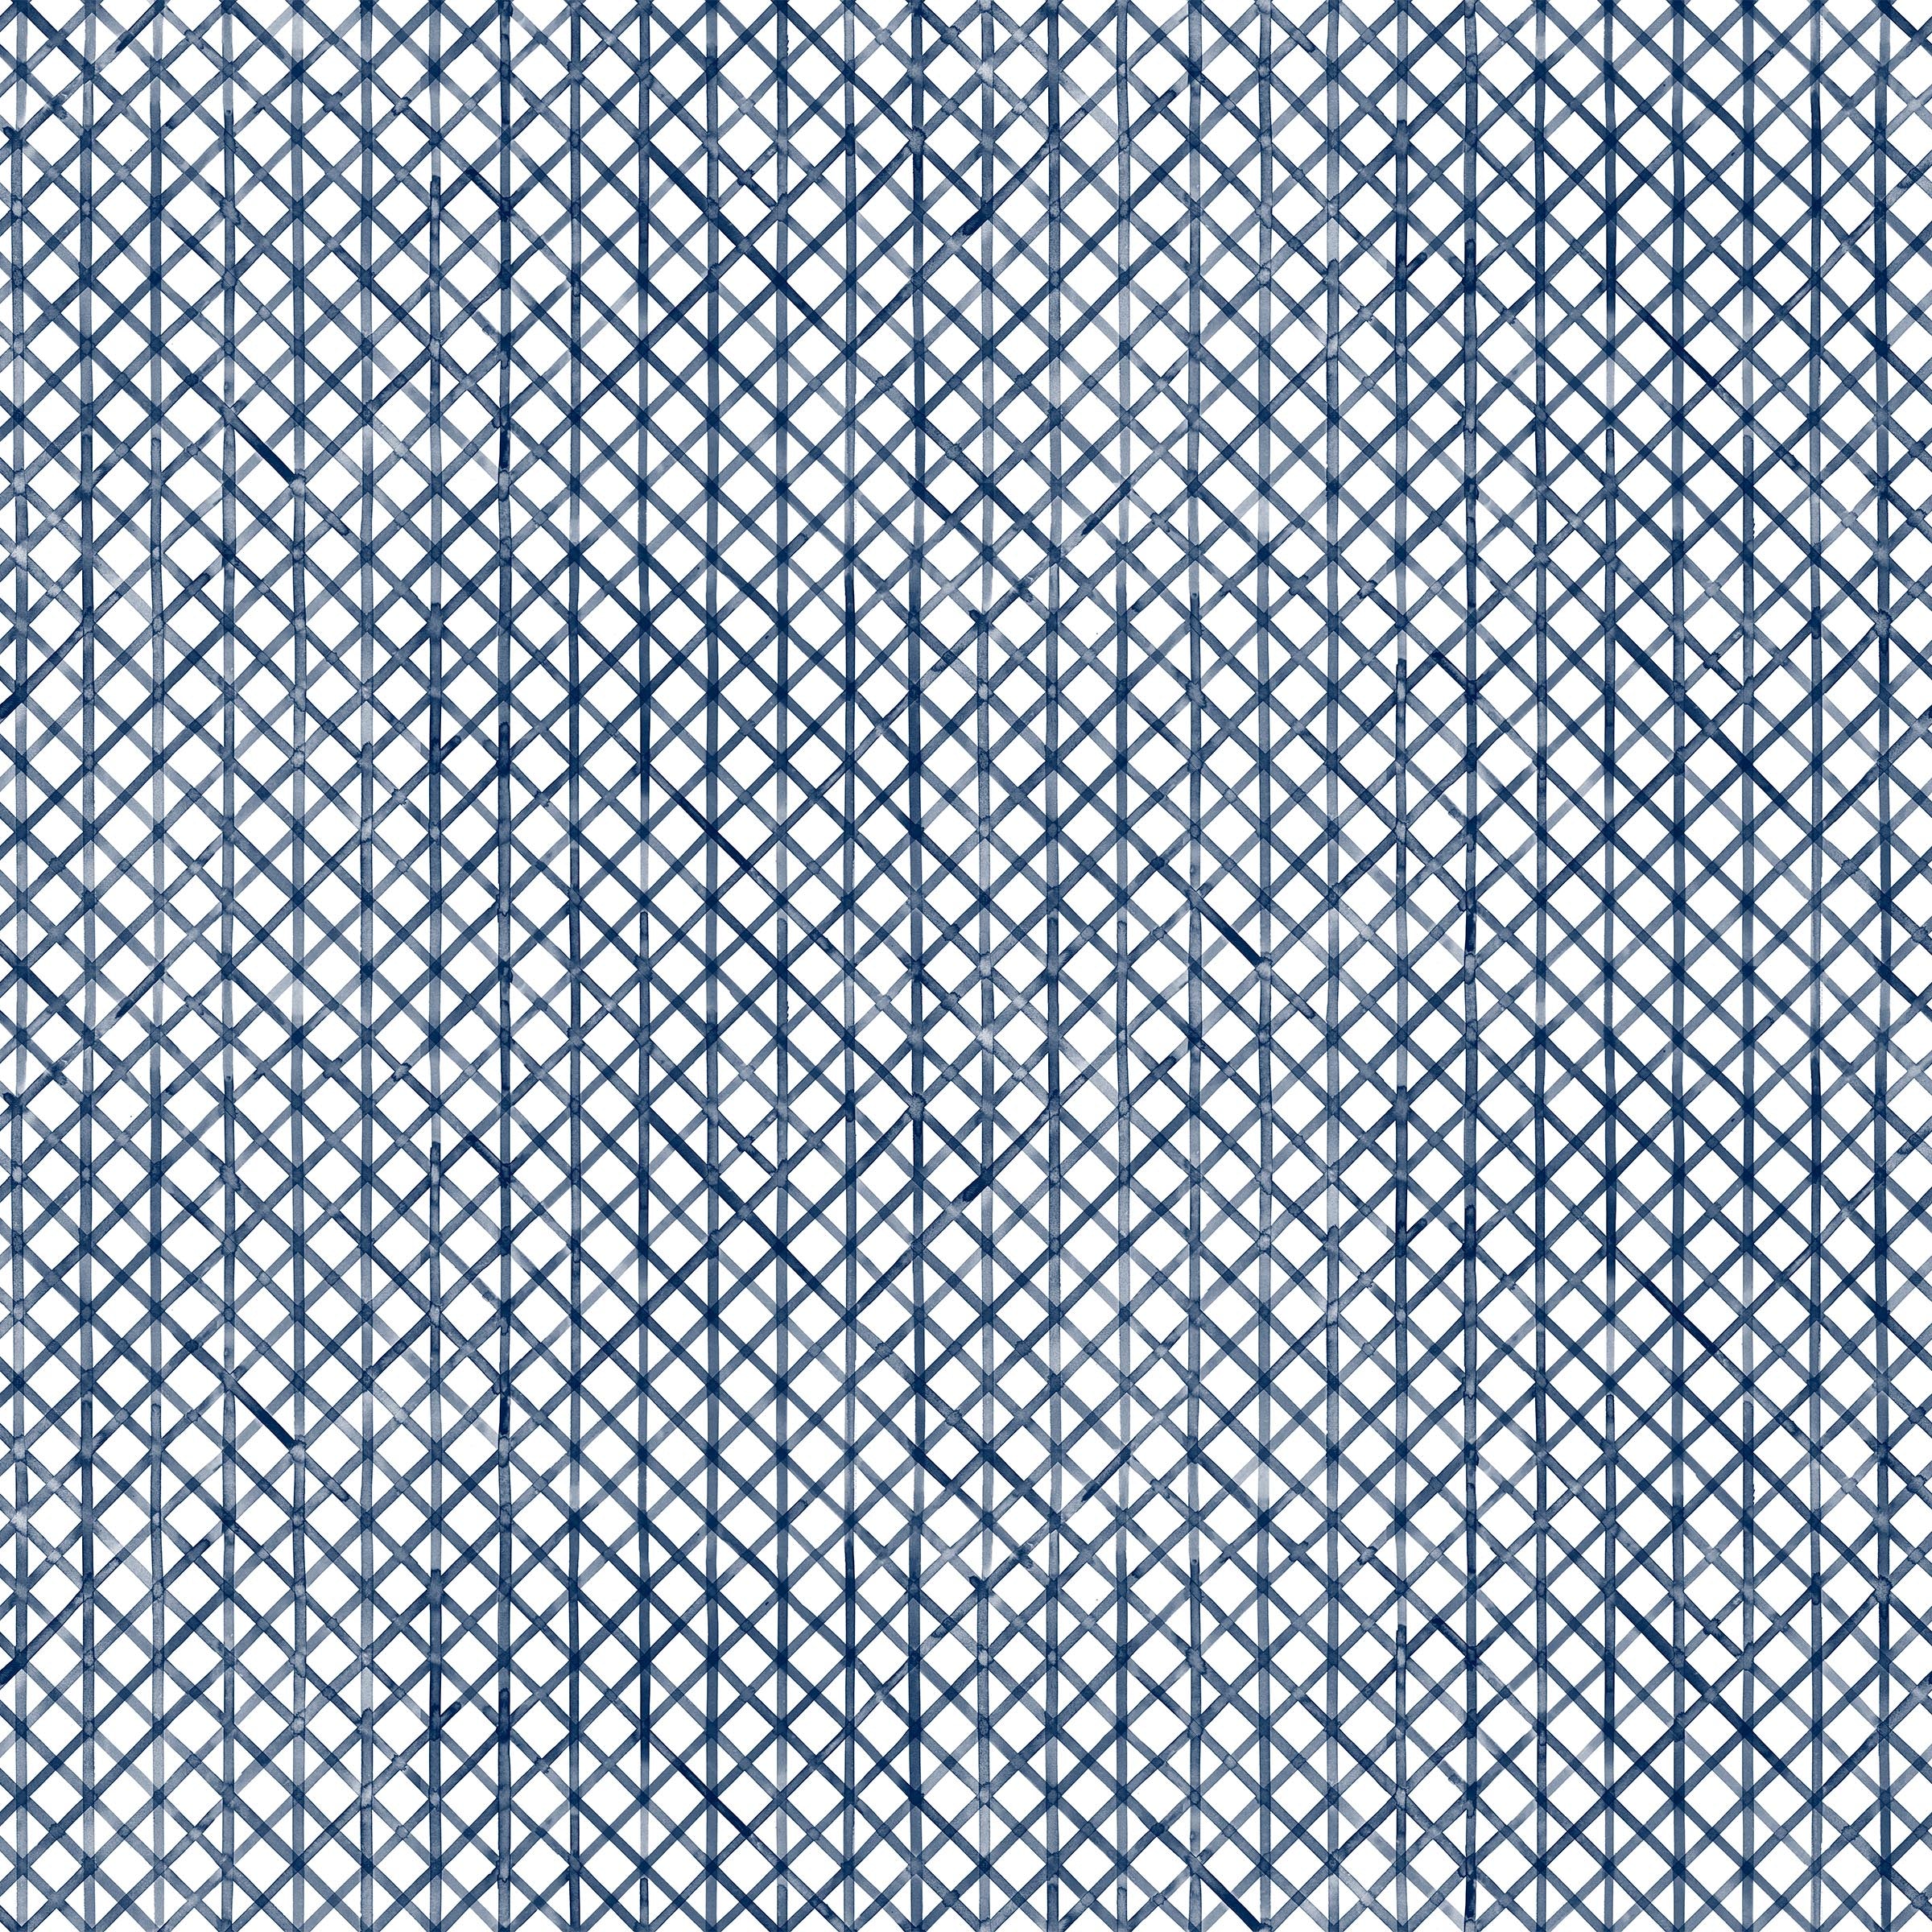 Detail of fabric in an intricate striped grid pattern in navy on a white field.